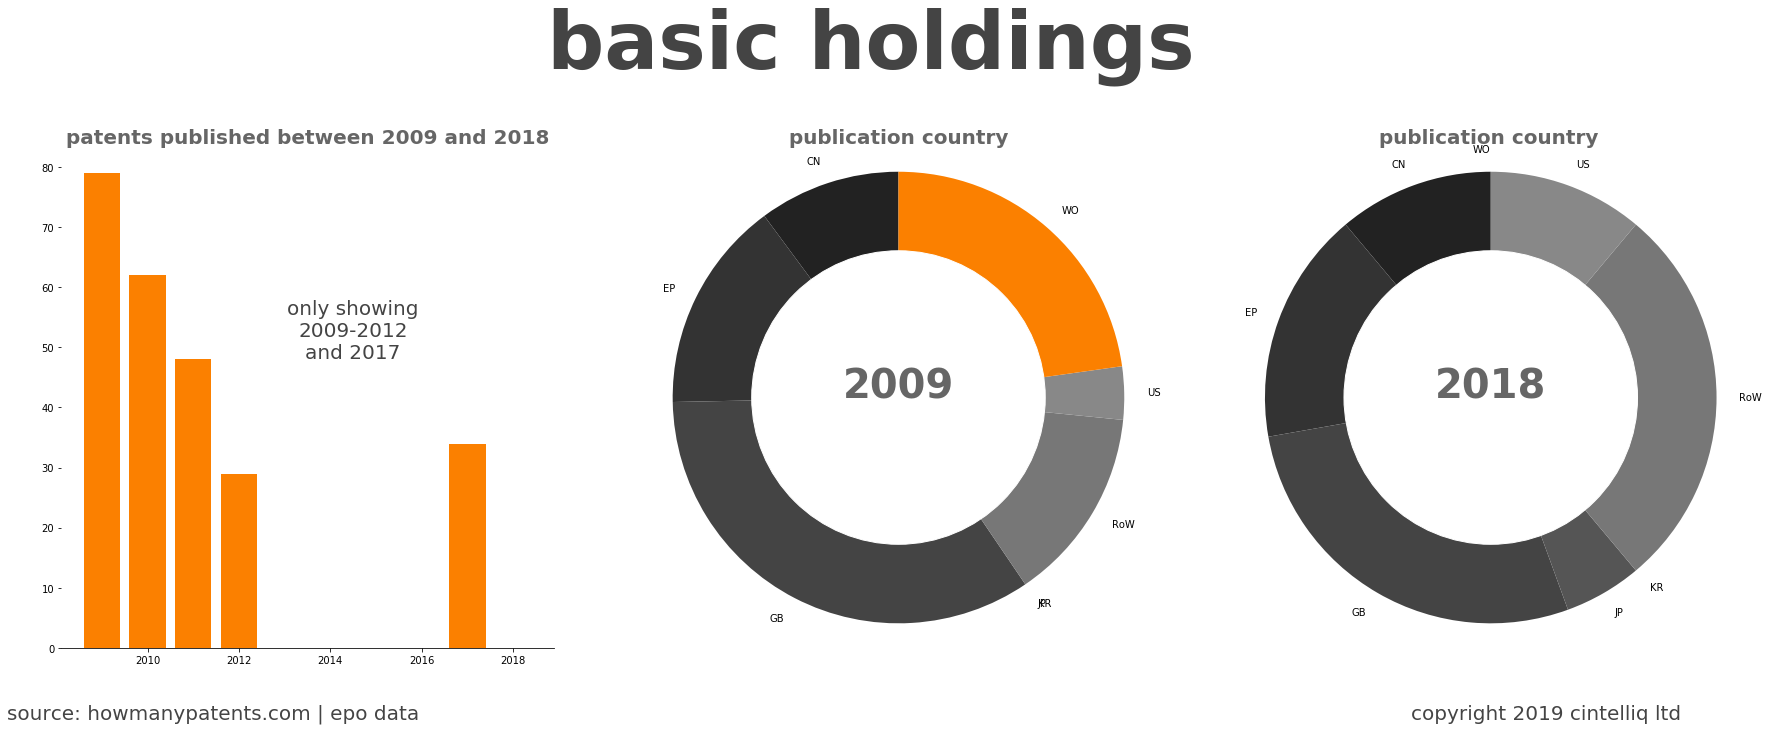 summary of patents for Basic Holdings